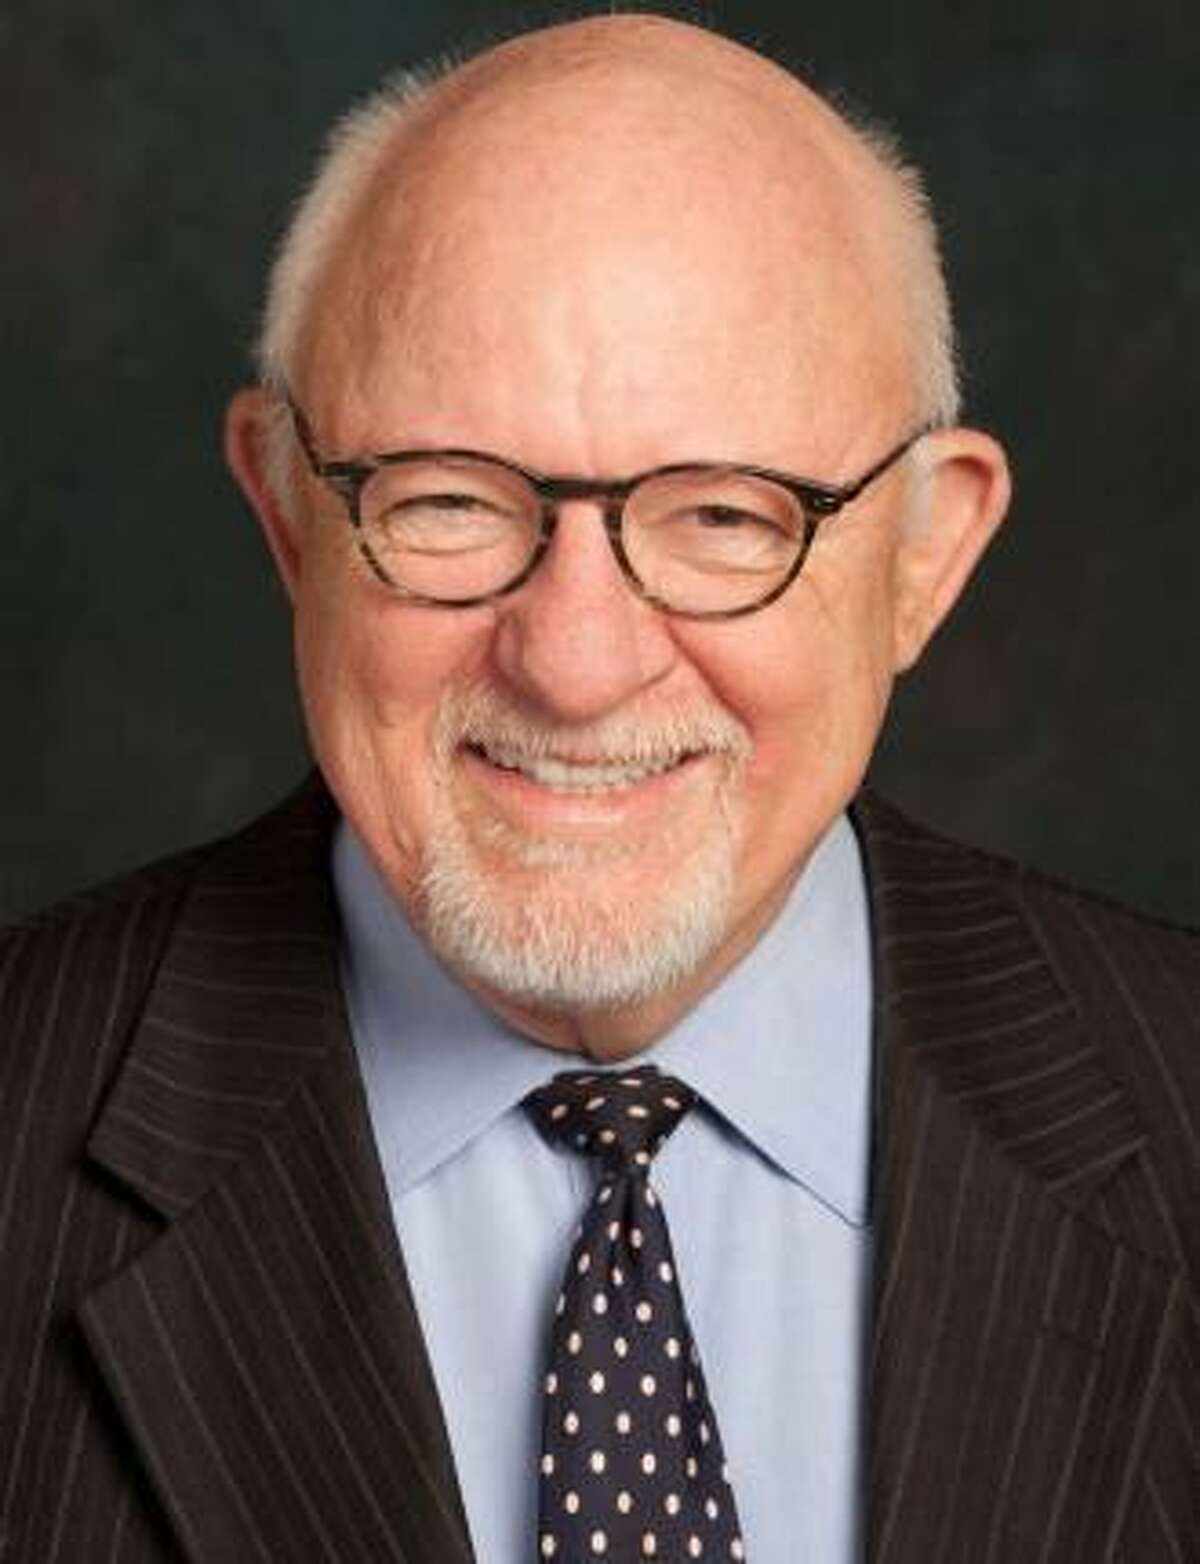 Ed Rollins will speak at the Republican Town Committee's annual Lincoln-Reagan Dinner on May 5, 2017 at the Woodway Country Club in Darien, Conn.